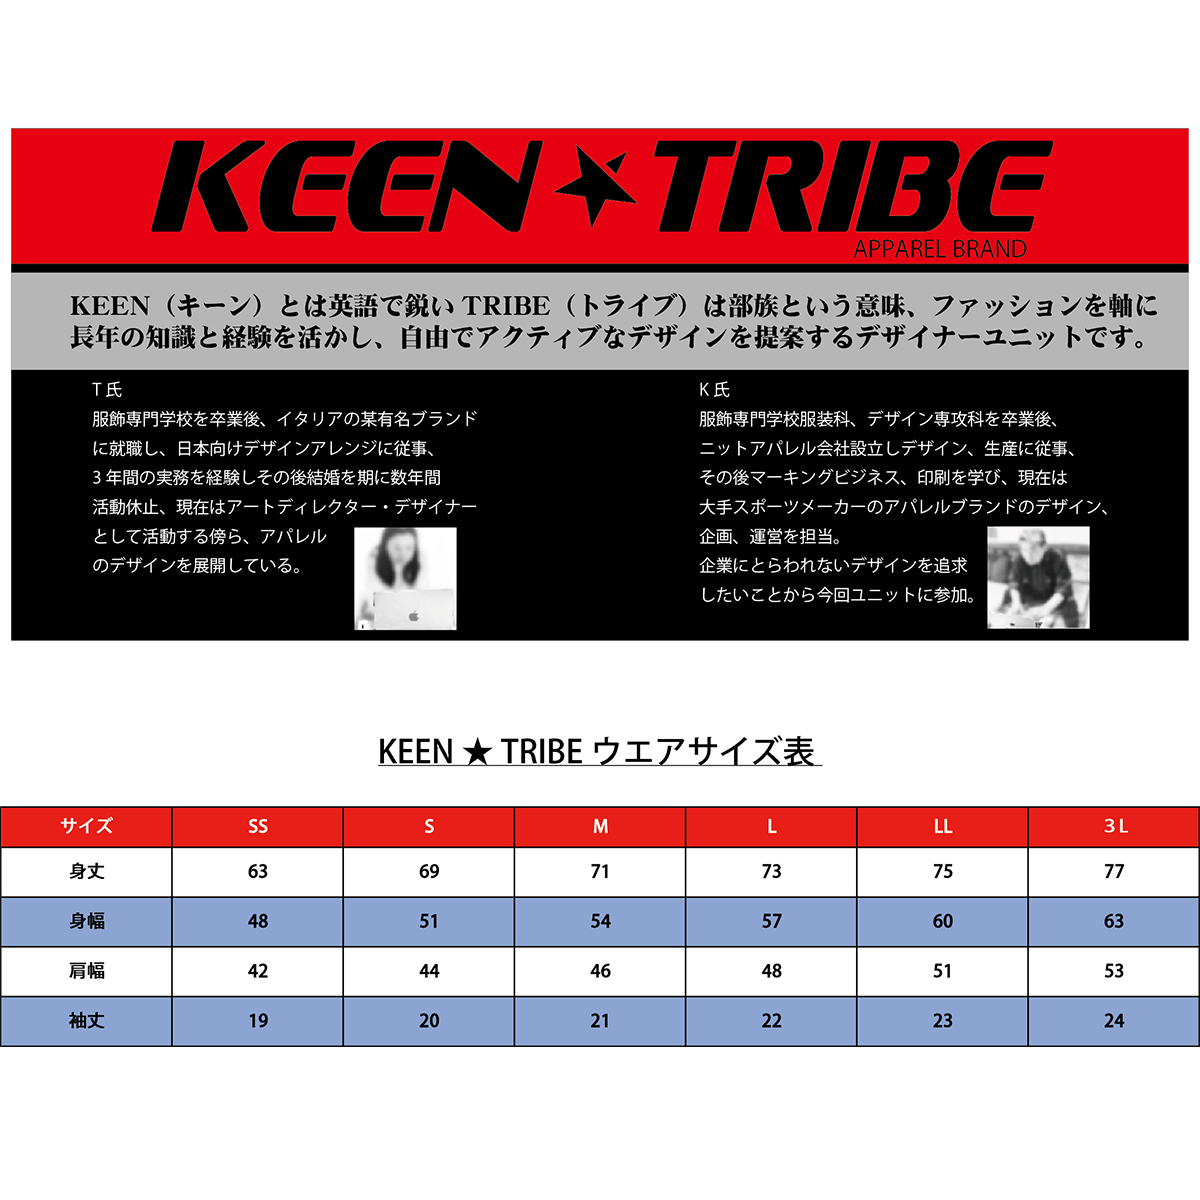 KEEN ★ TRIBE　KT-1(受注生産)